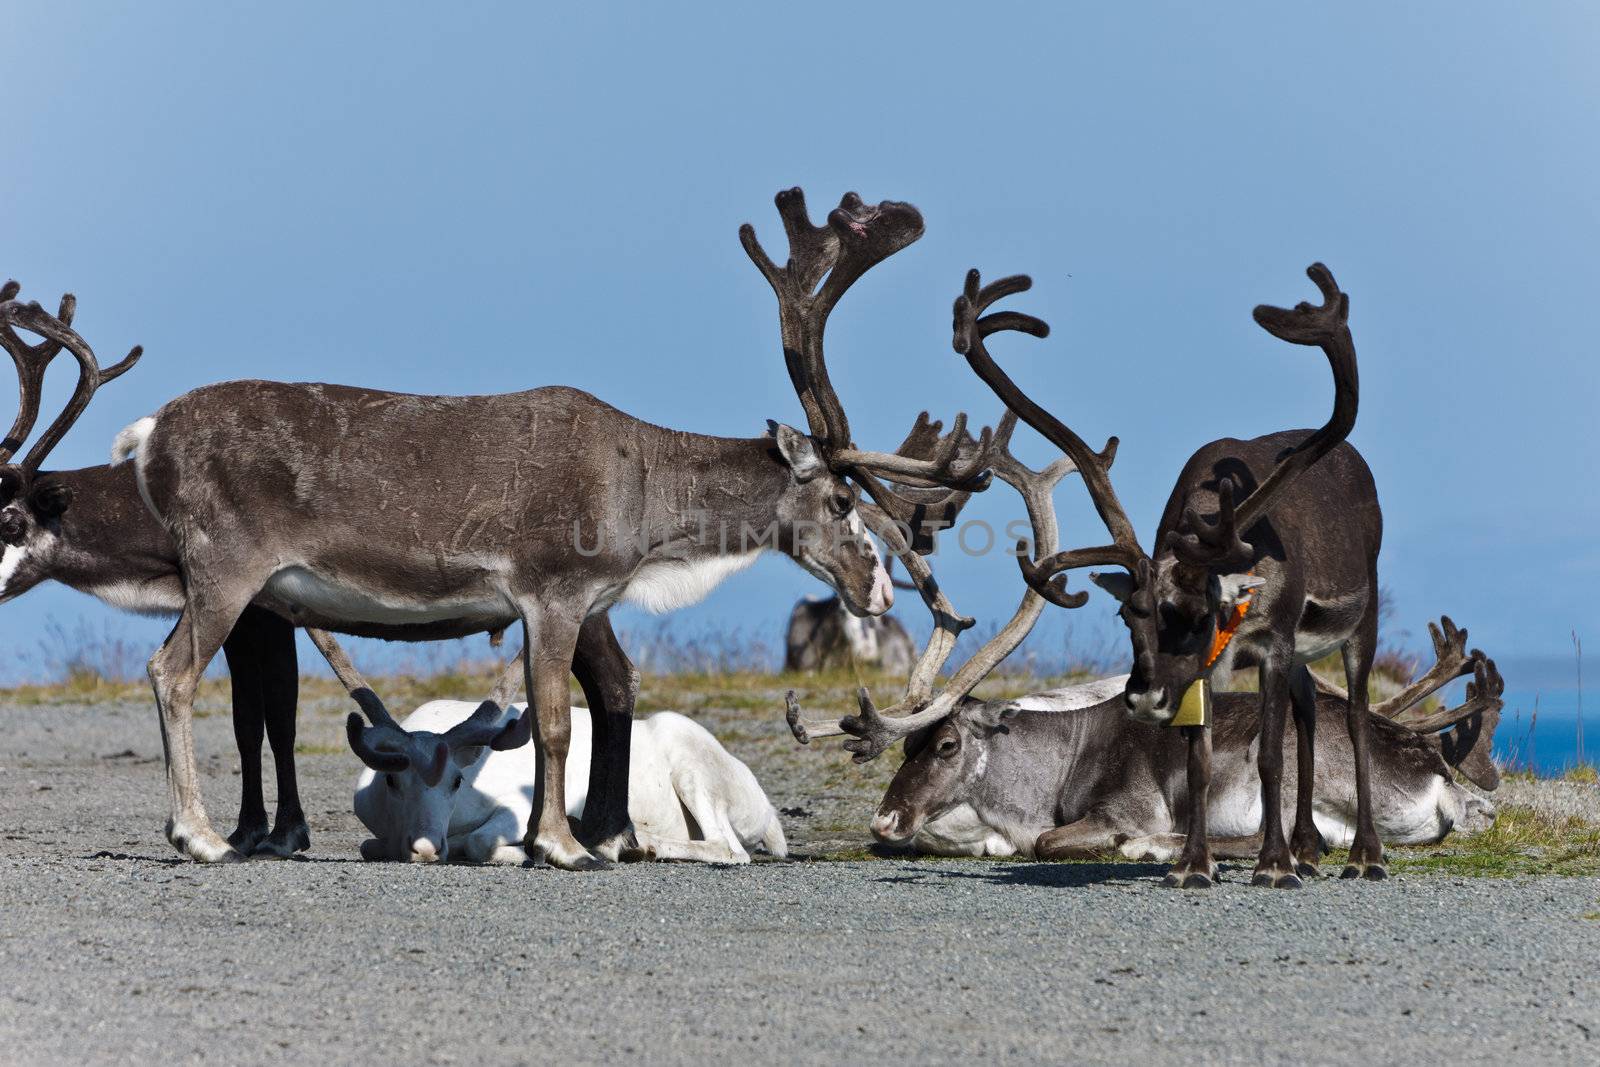 the reindeer a rest, Norway by Discovod